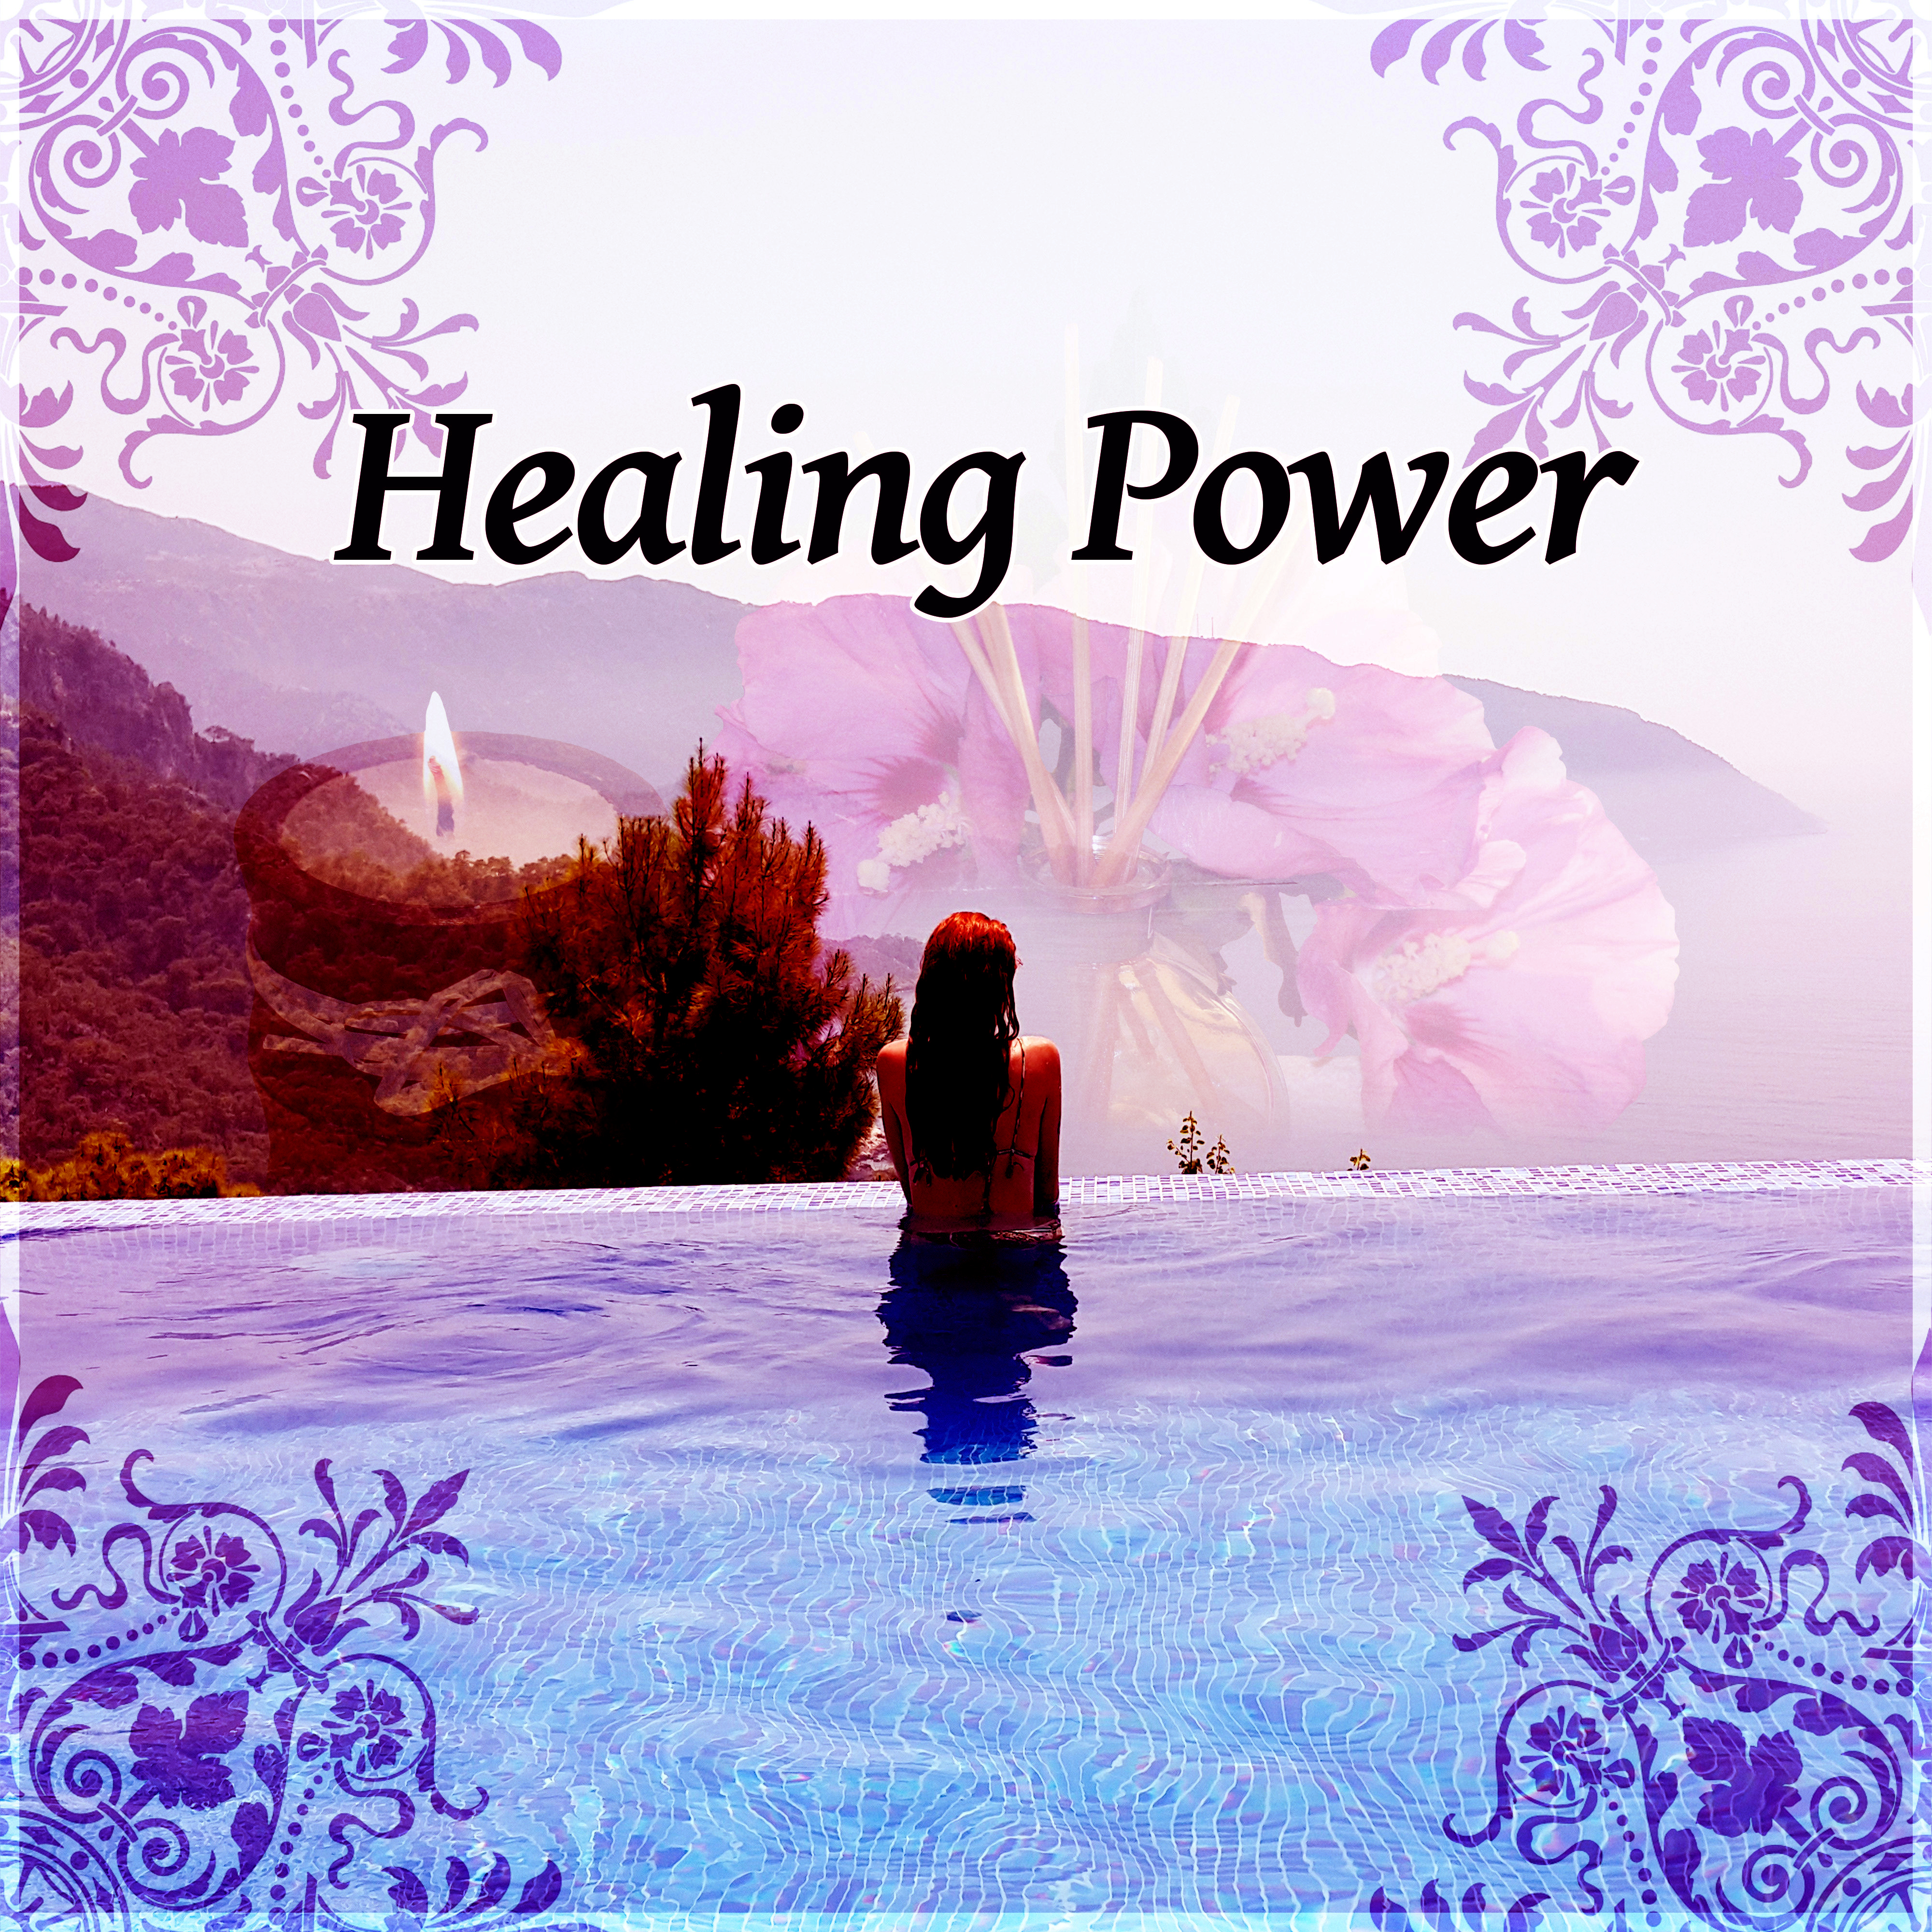 Healing Power – Calming & Healing Nature Sounds for Spa, Massage and Relaxation, Relaxing Massage, Reiki, Sauna, Spa, Nature Sounds